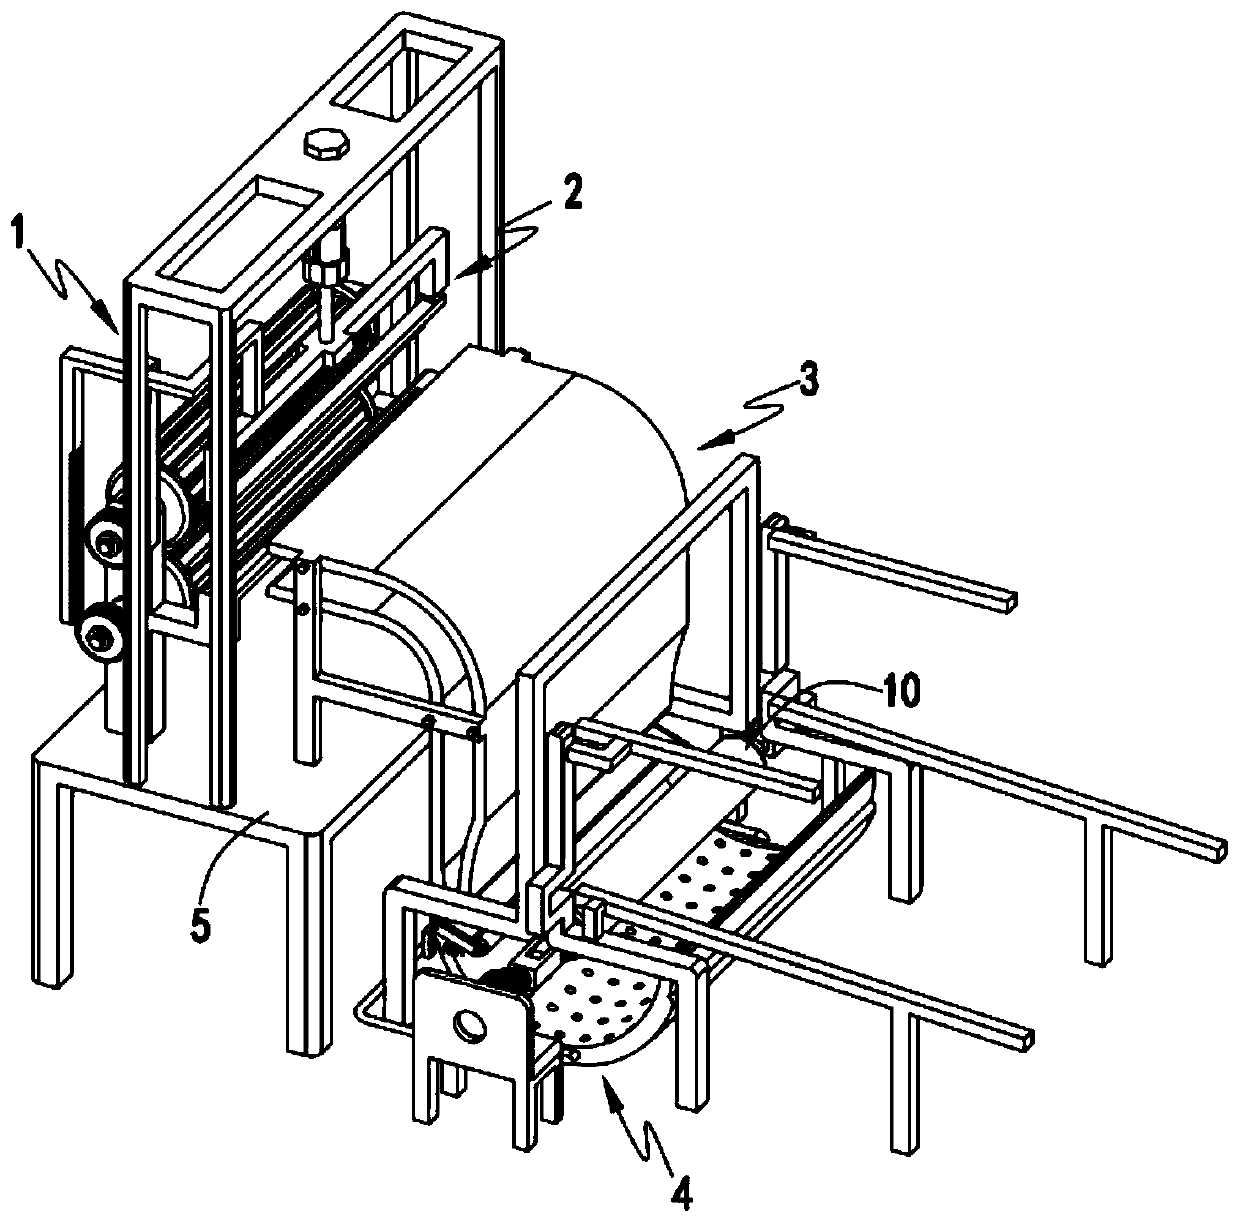 Textile warp knitting production equipment and textile warp knitting production method